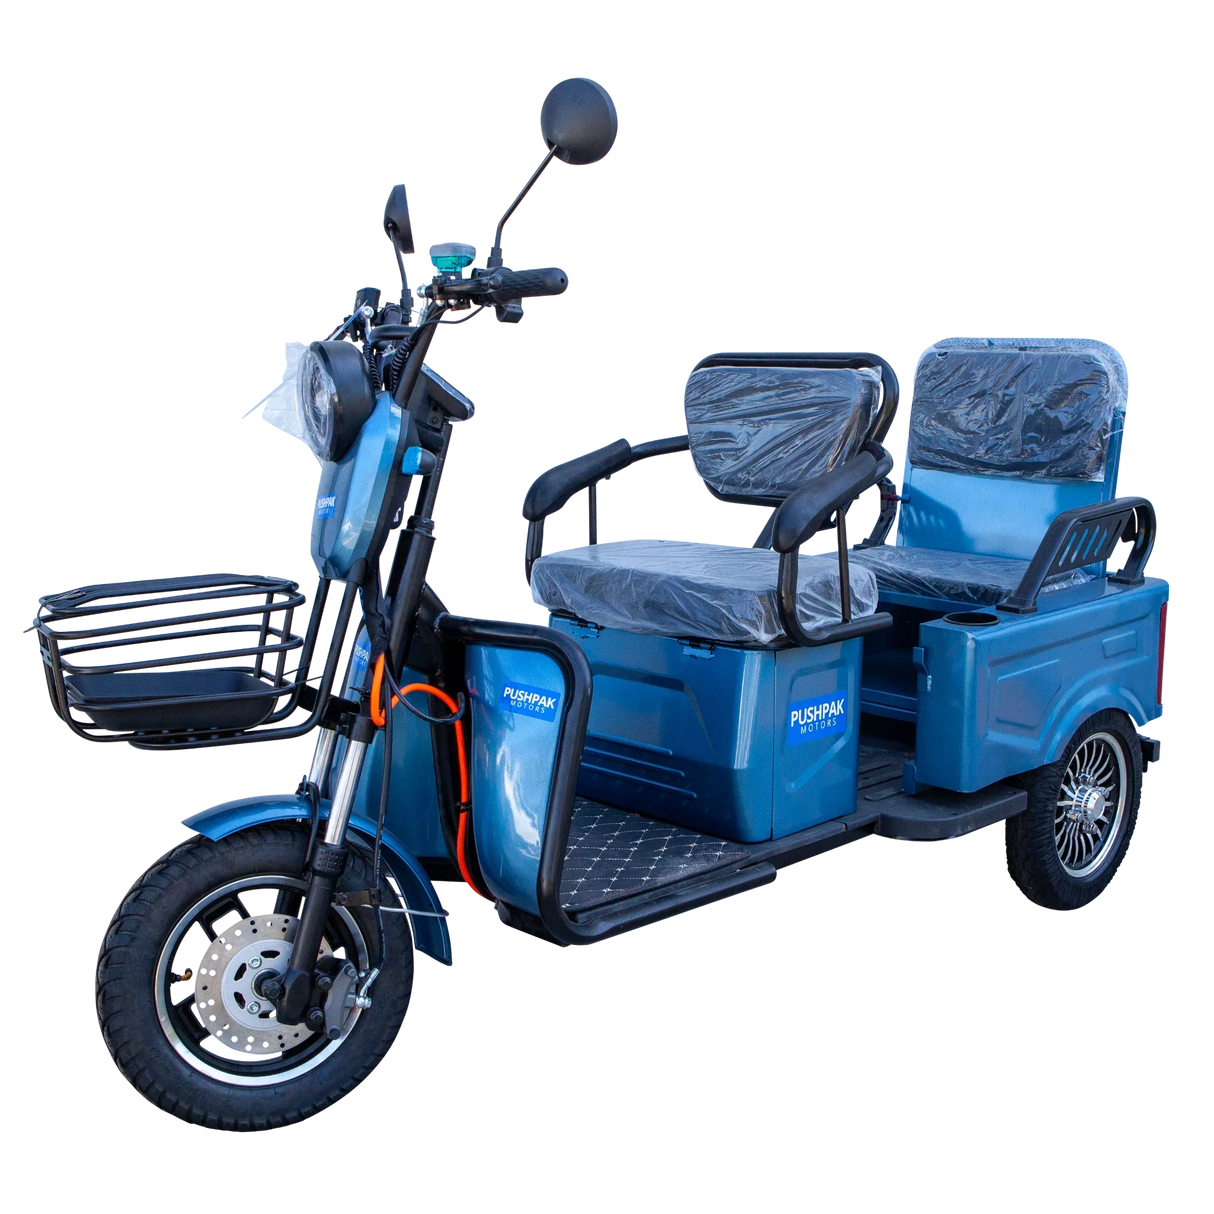 Pushpak 3000 2-Person Electric Mobility Scooter